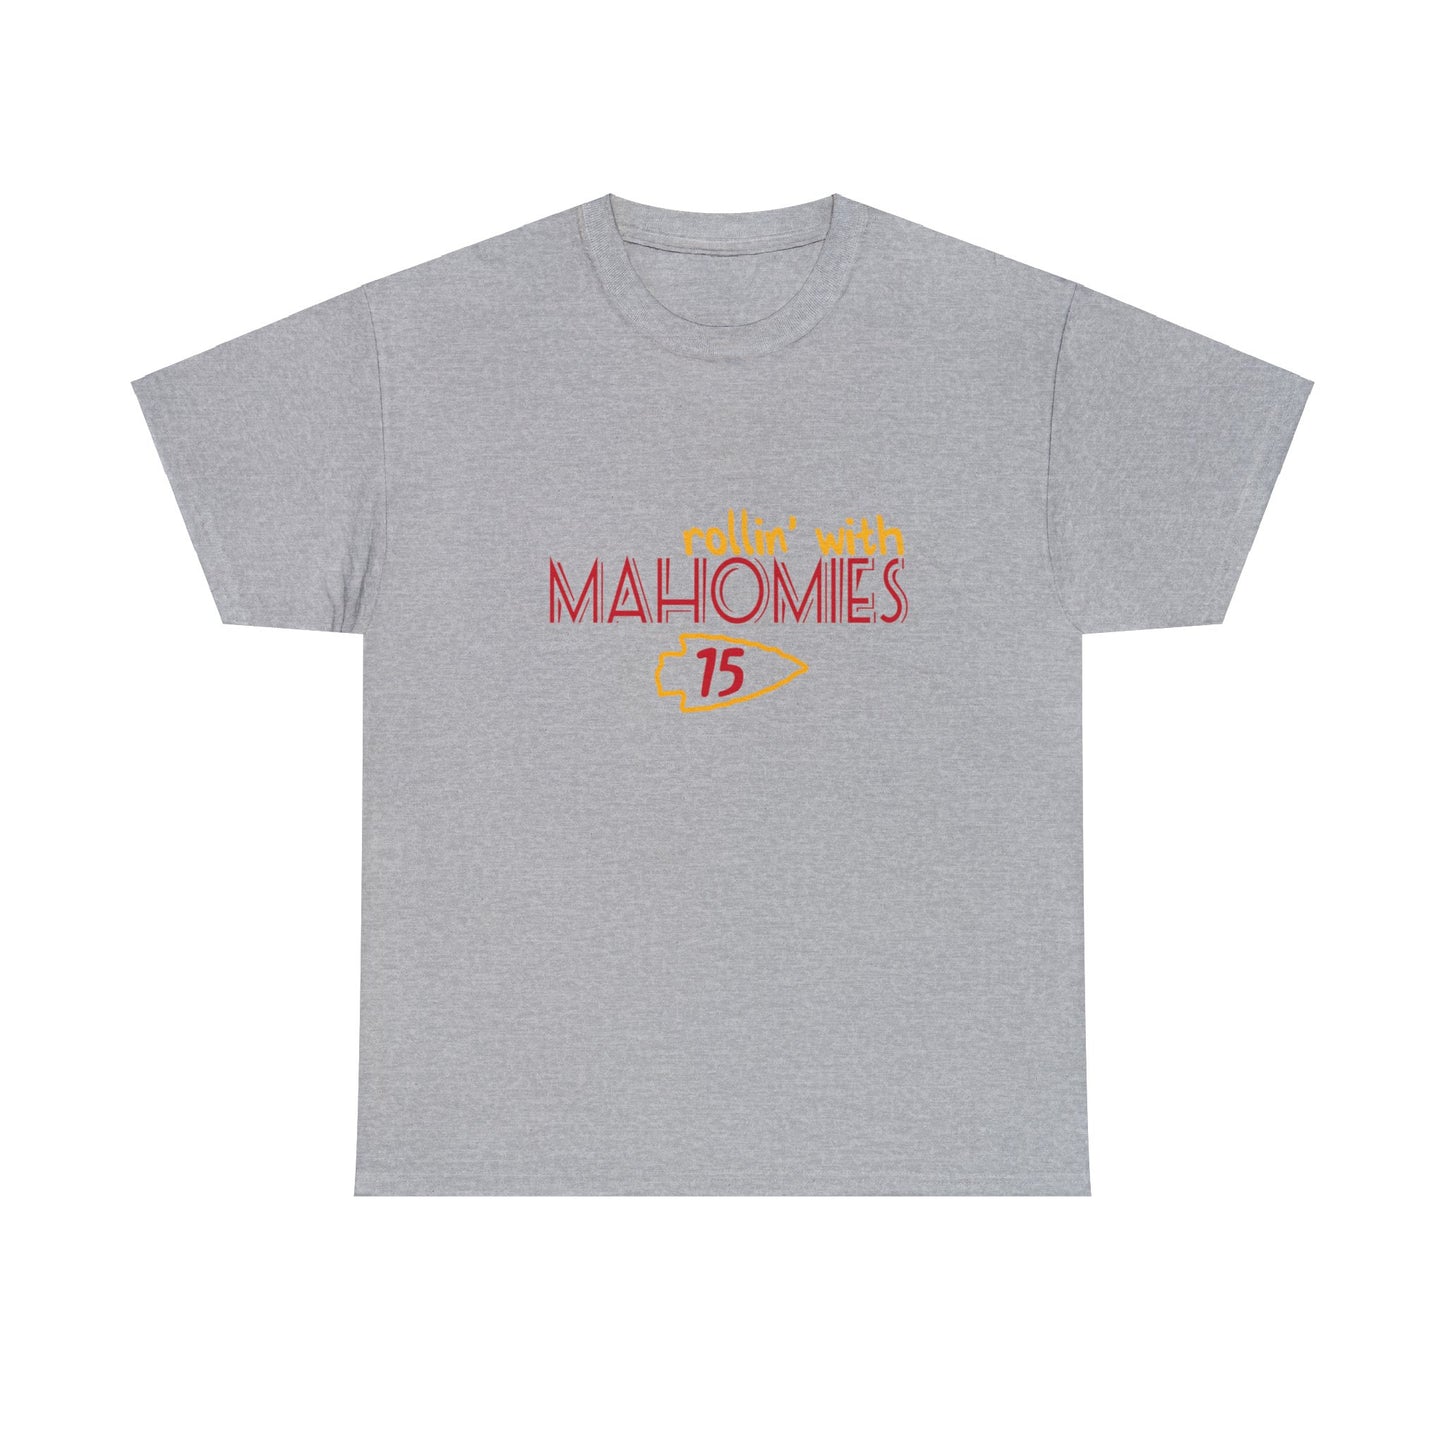 "Rollin With Mahomies" Chiefs T-shirt, perfect for game day wear.